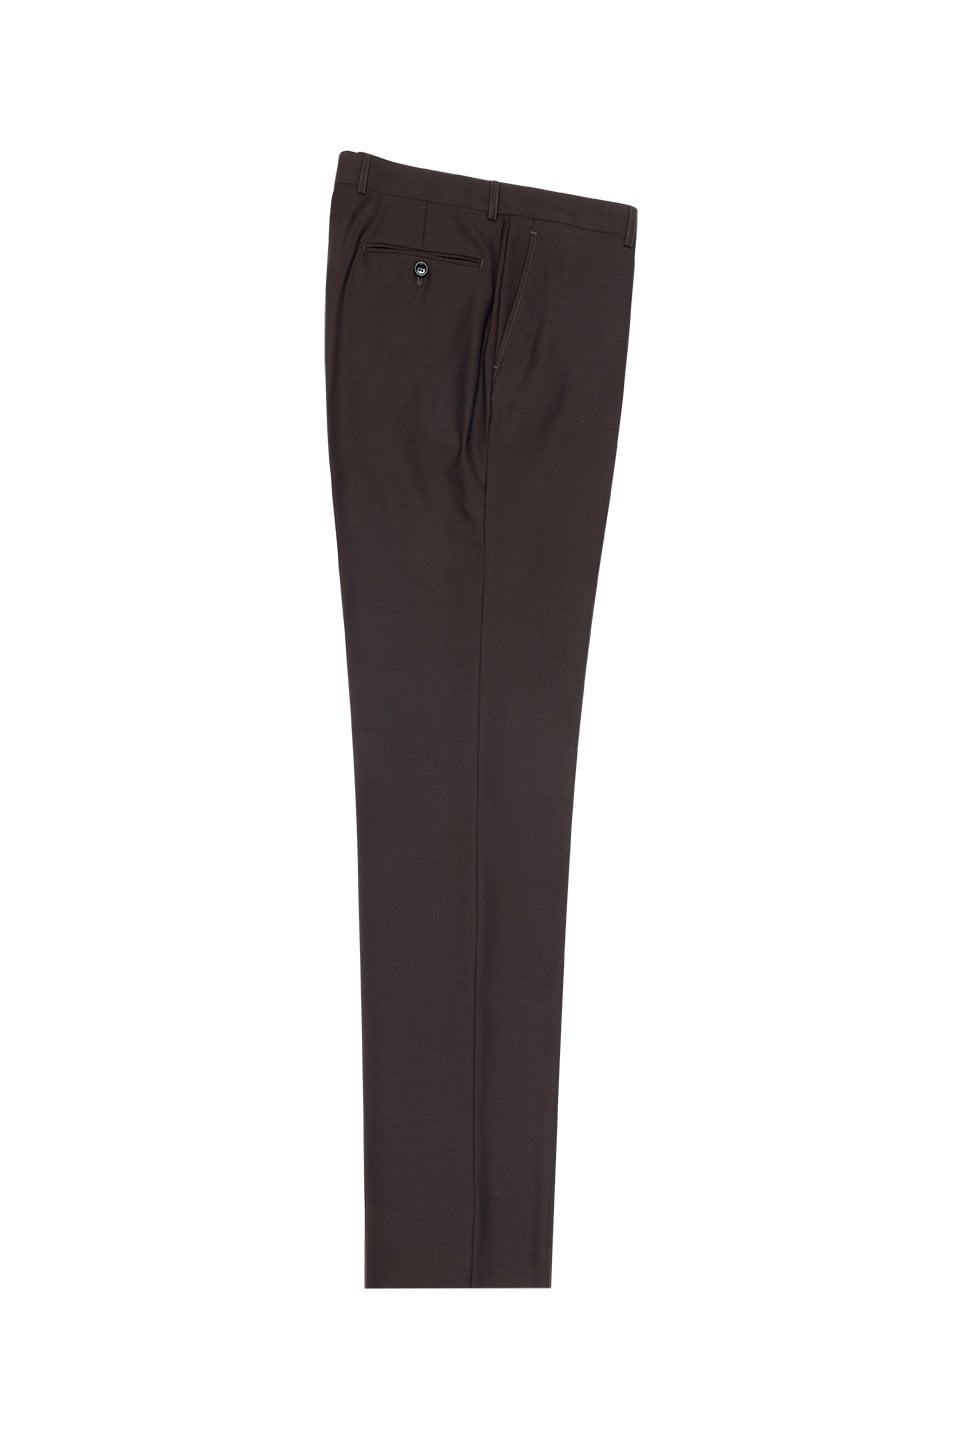 Flat Front Pure Wool Dress Pants 2560 TIG1002 Modern Fit Tiglio Luxe Navy 